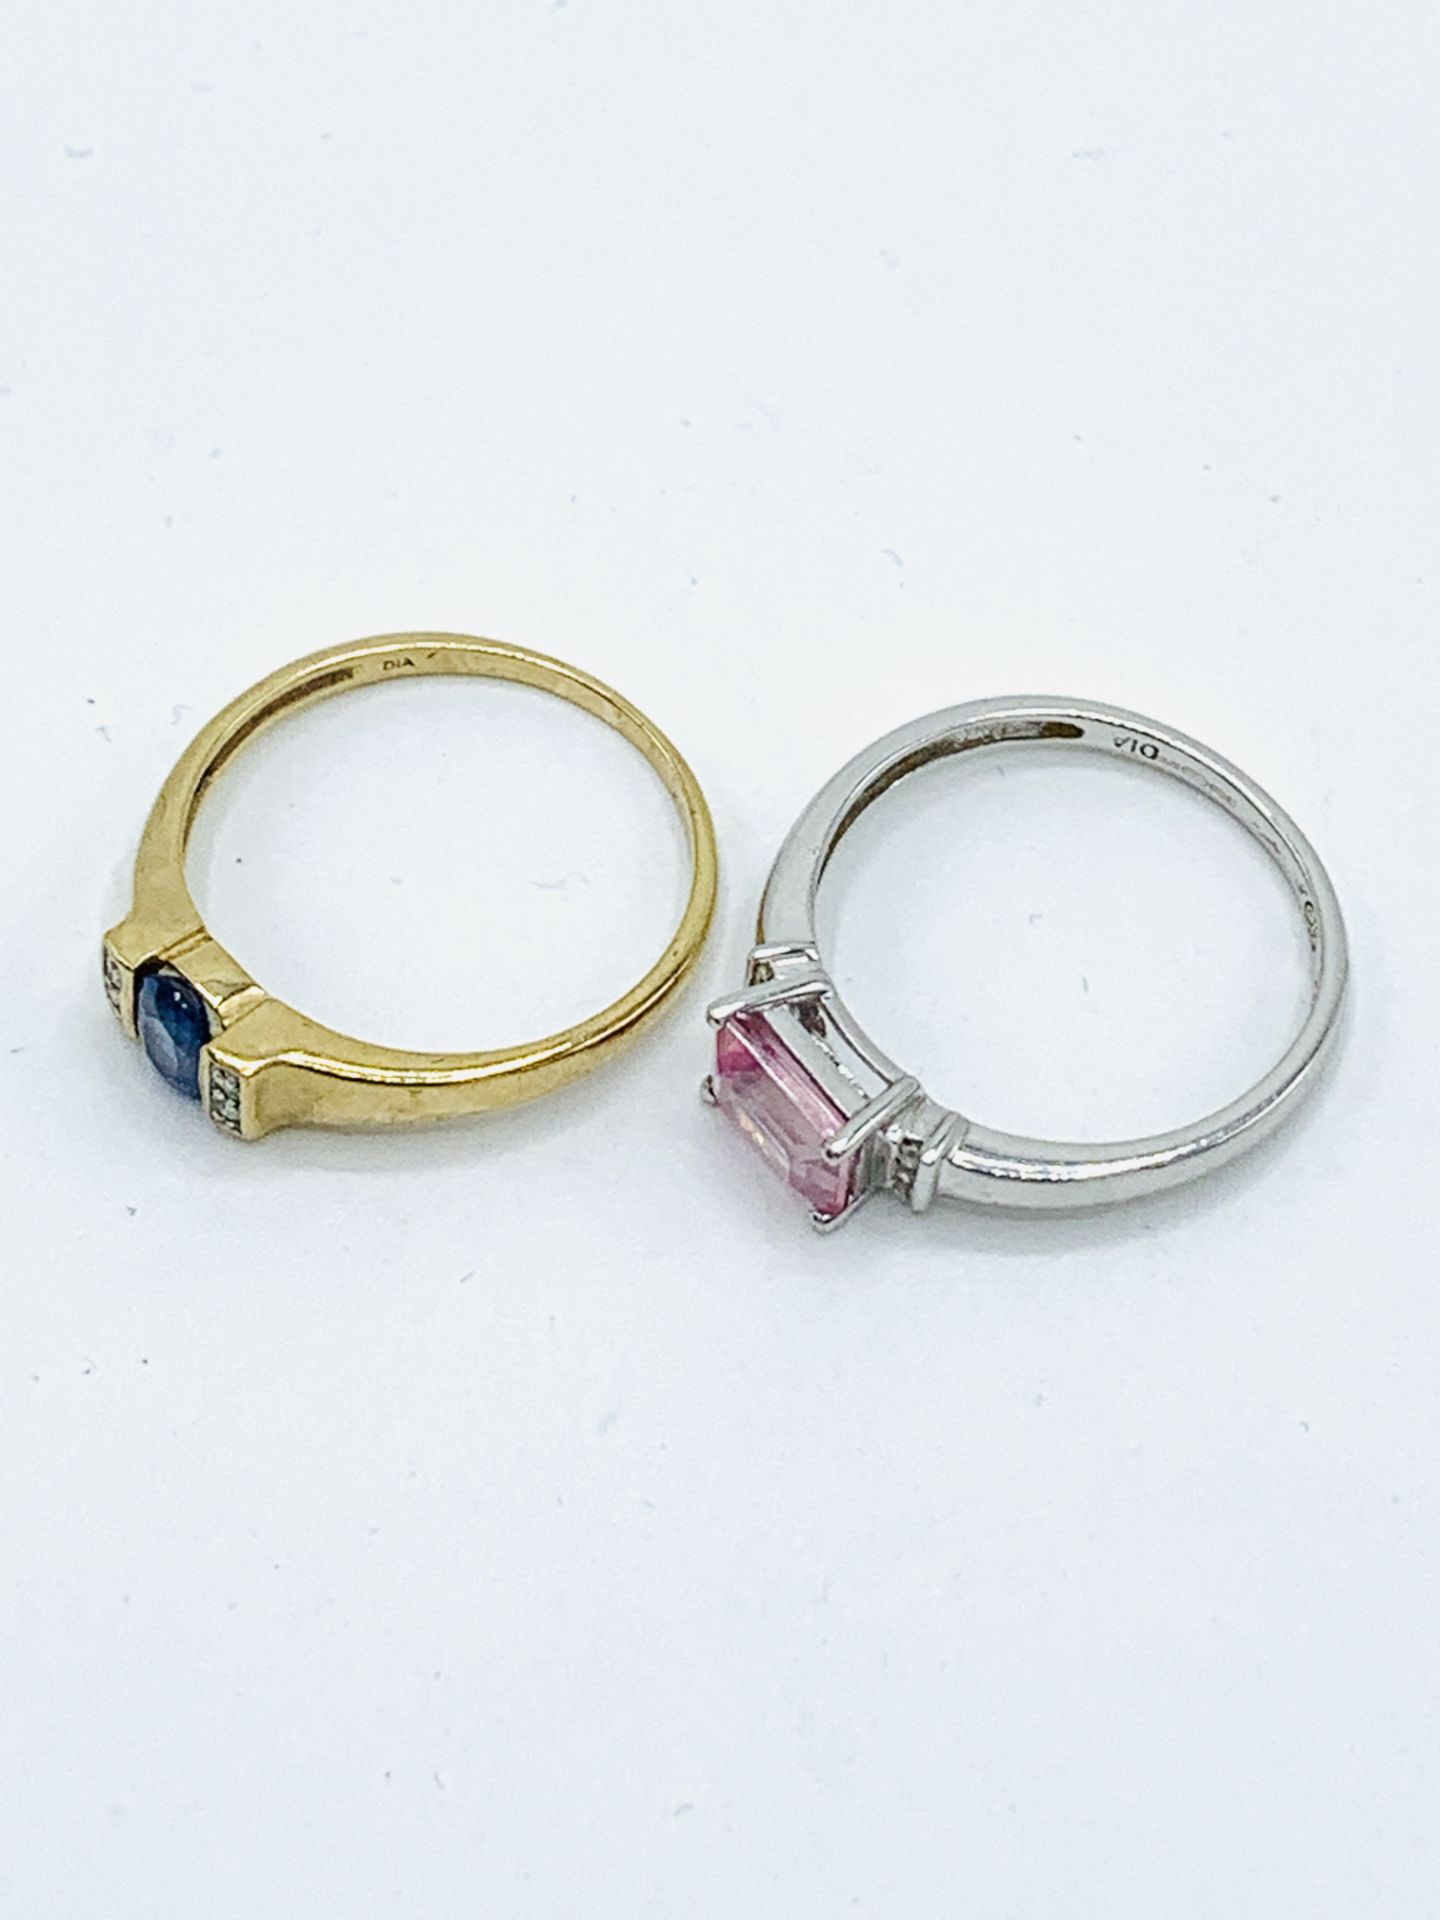 Two 9ct gold rings - Image 3 of 4